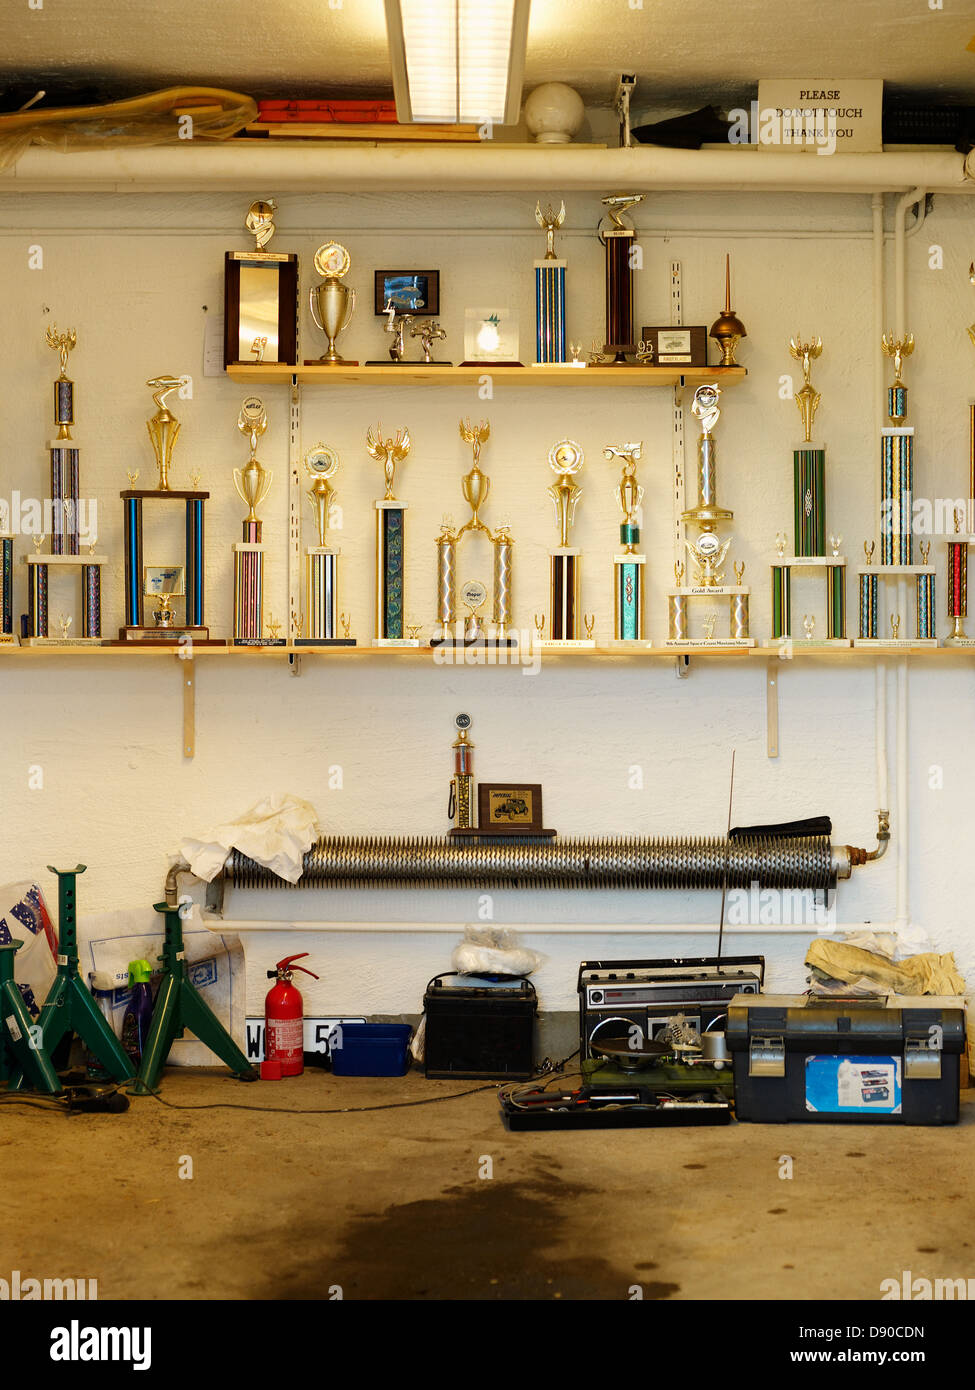 A collection of trophies in a garage. Stock Photo